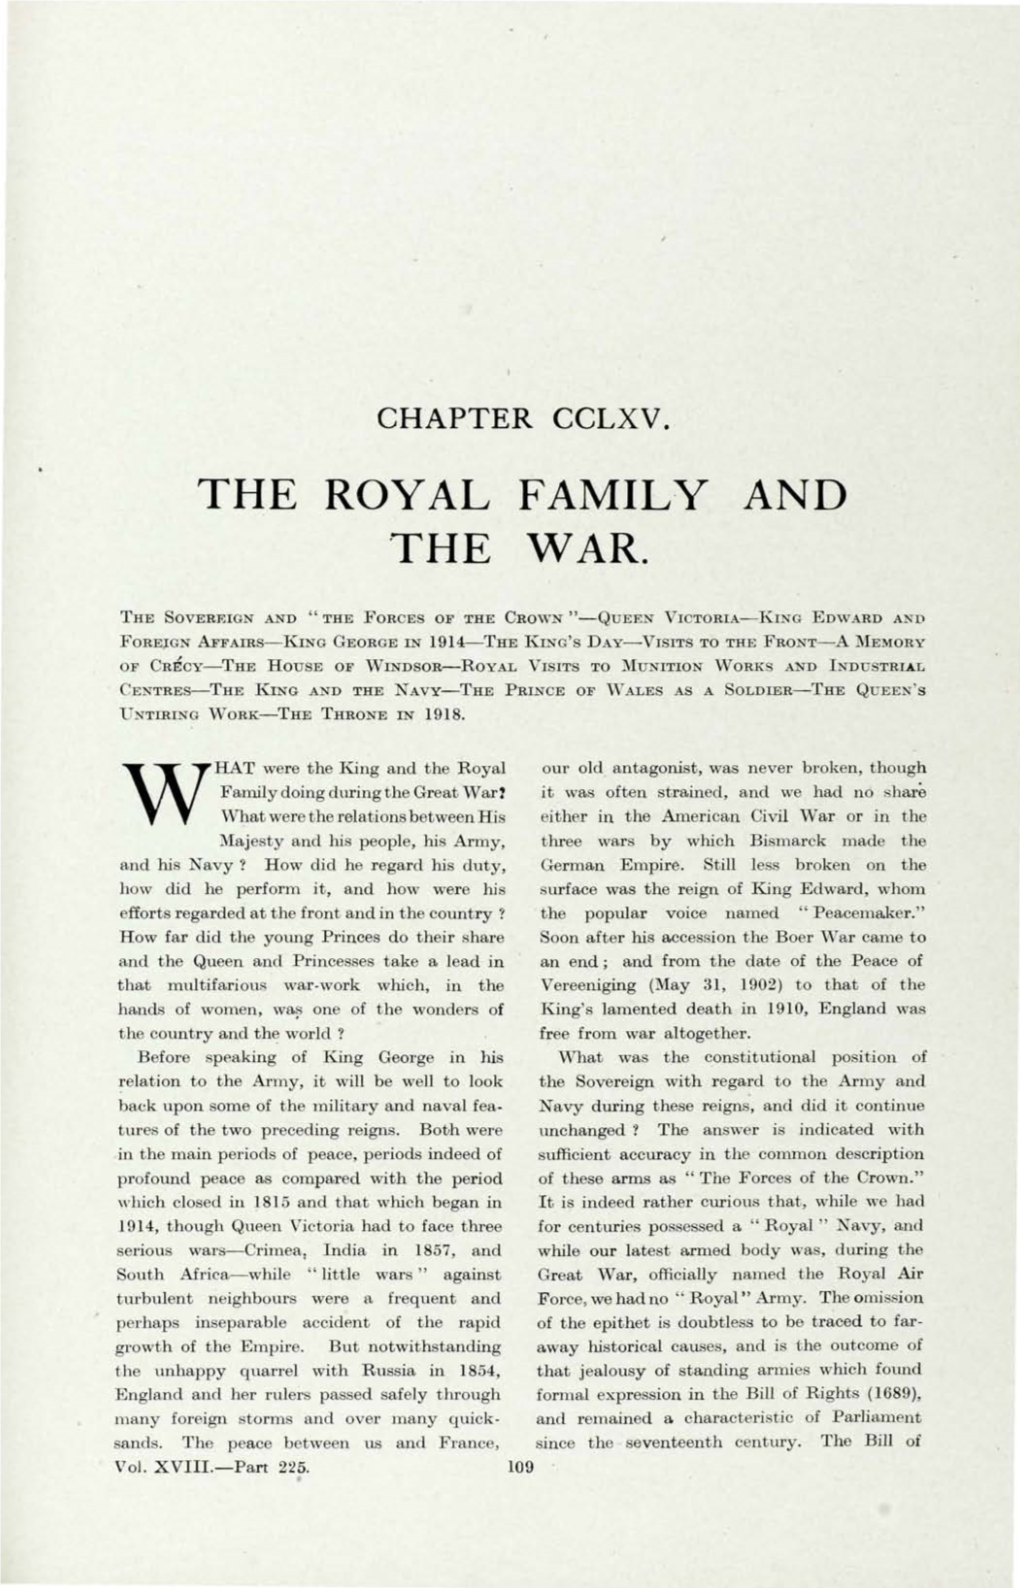 The Royal Family and the War